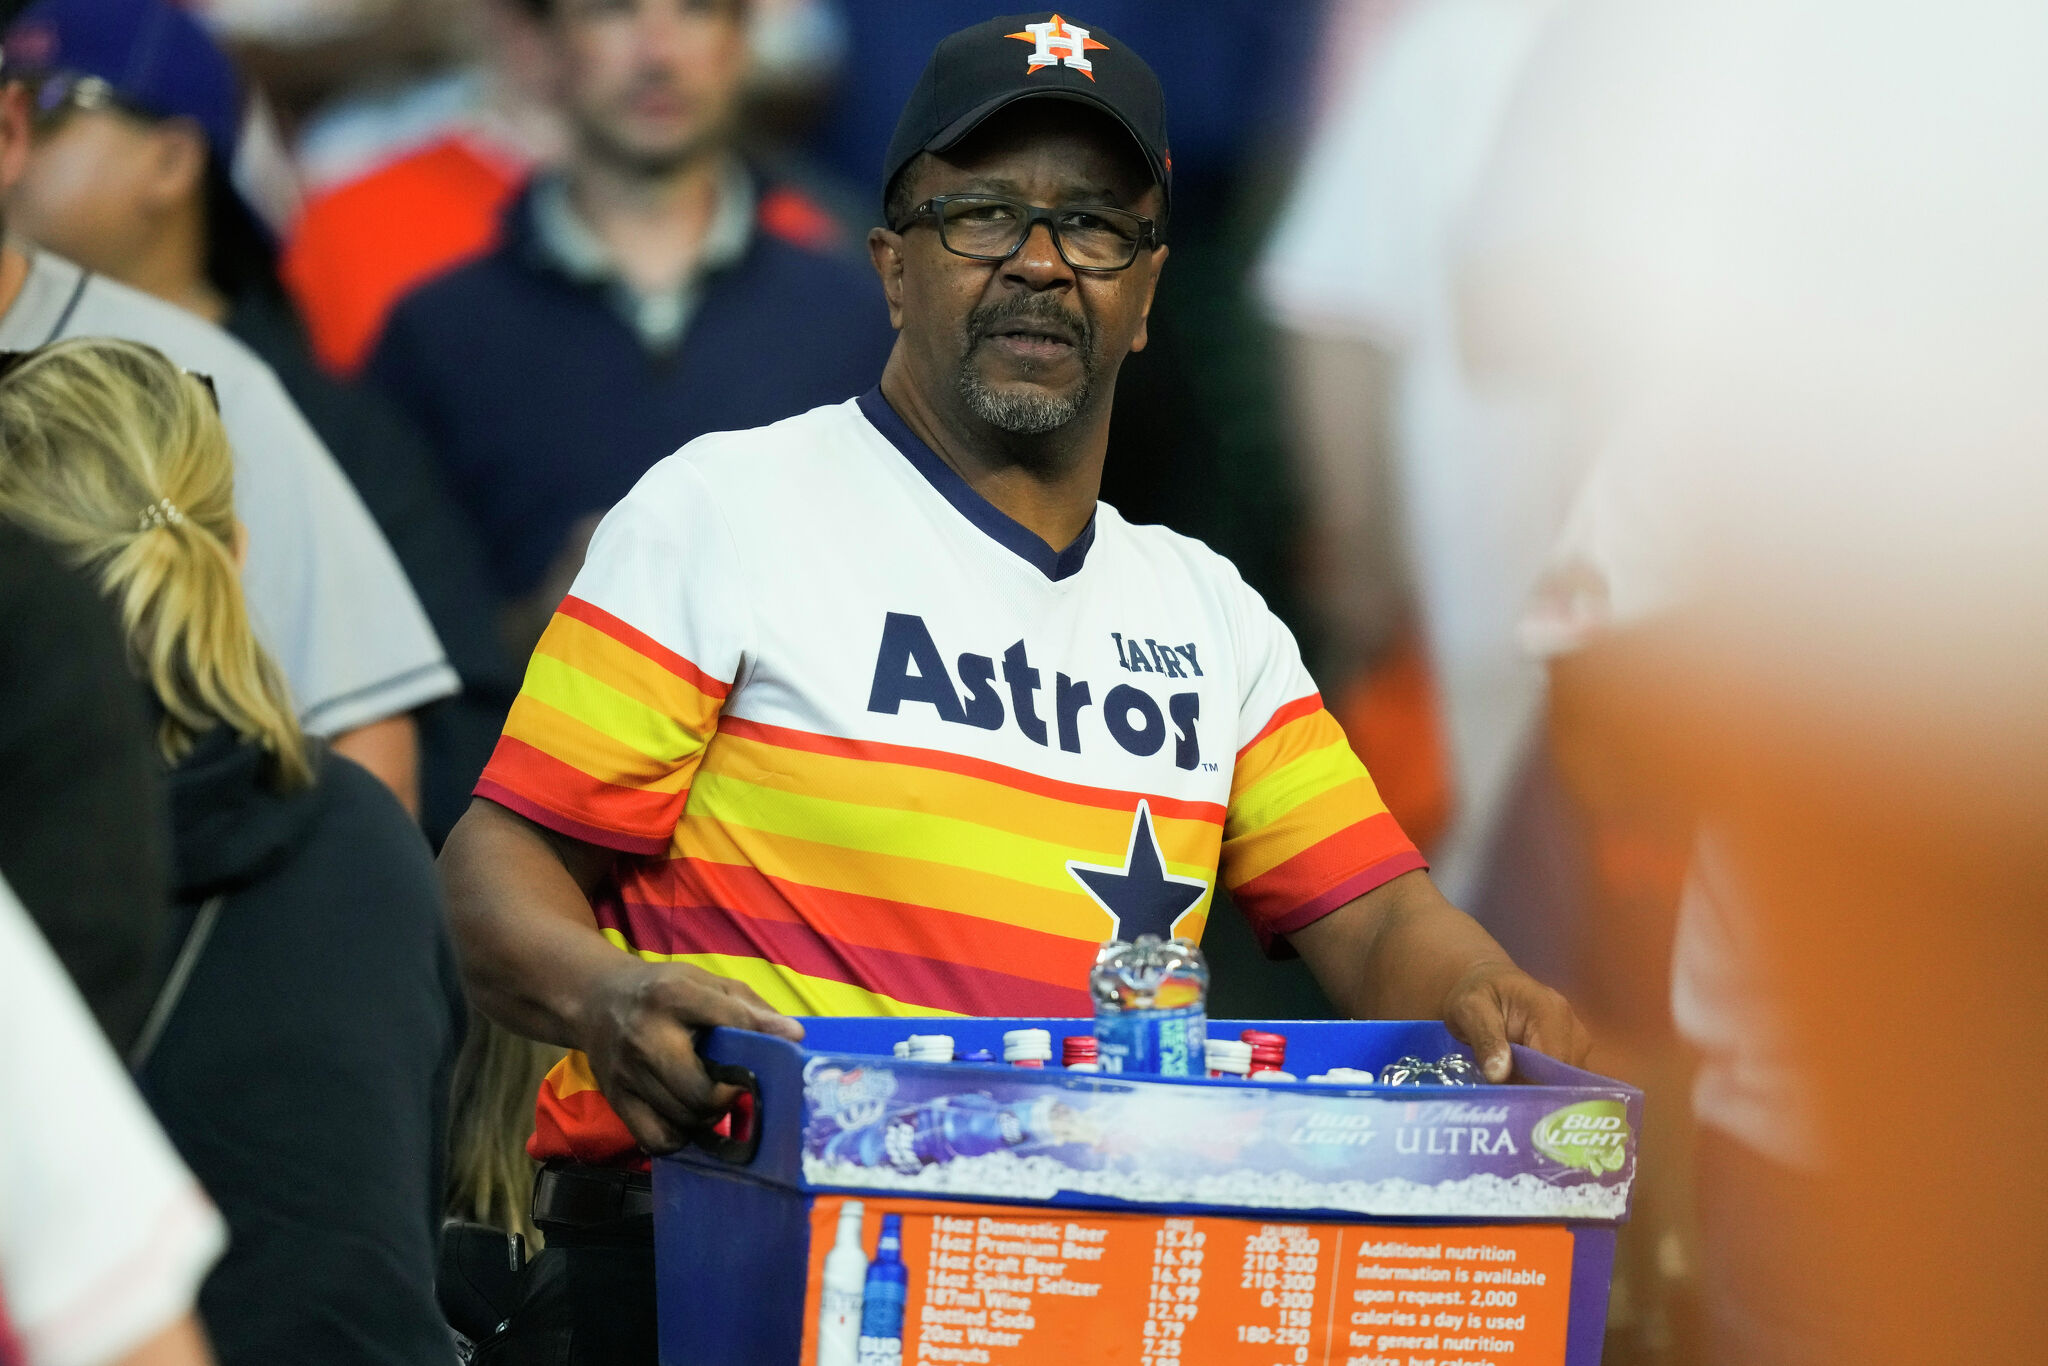 For vendors, buskers, Astros outcome is matter of winning and losing